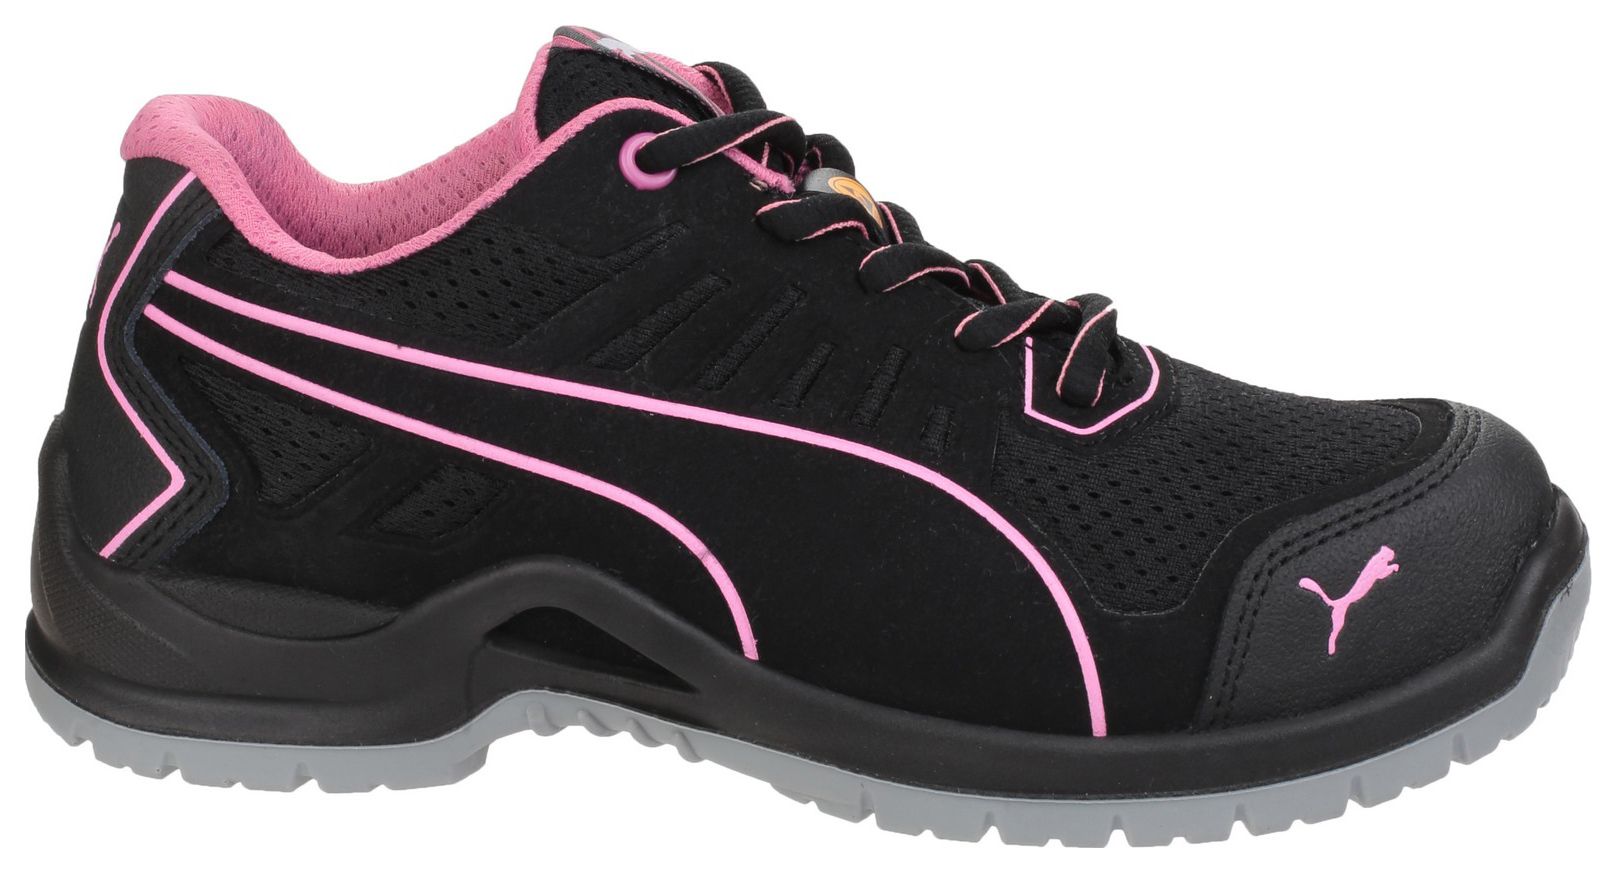 Image of Puma Fuse Technic 644110 Womens Safety Trainers Black - Size 42